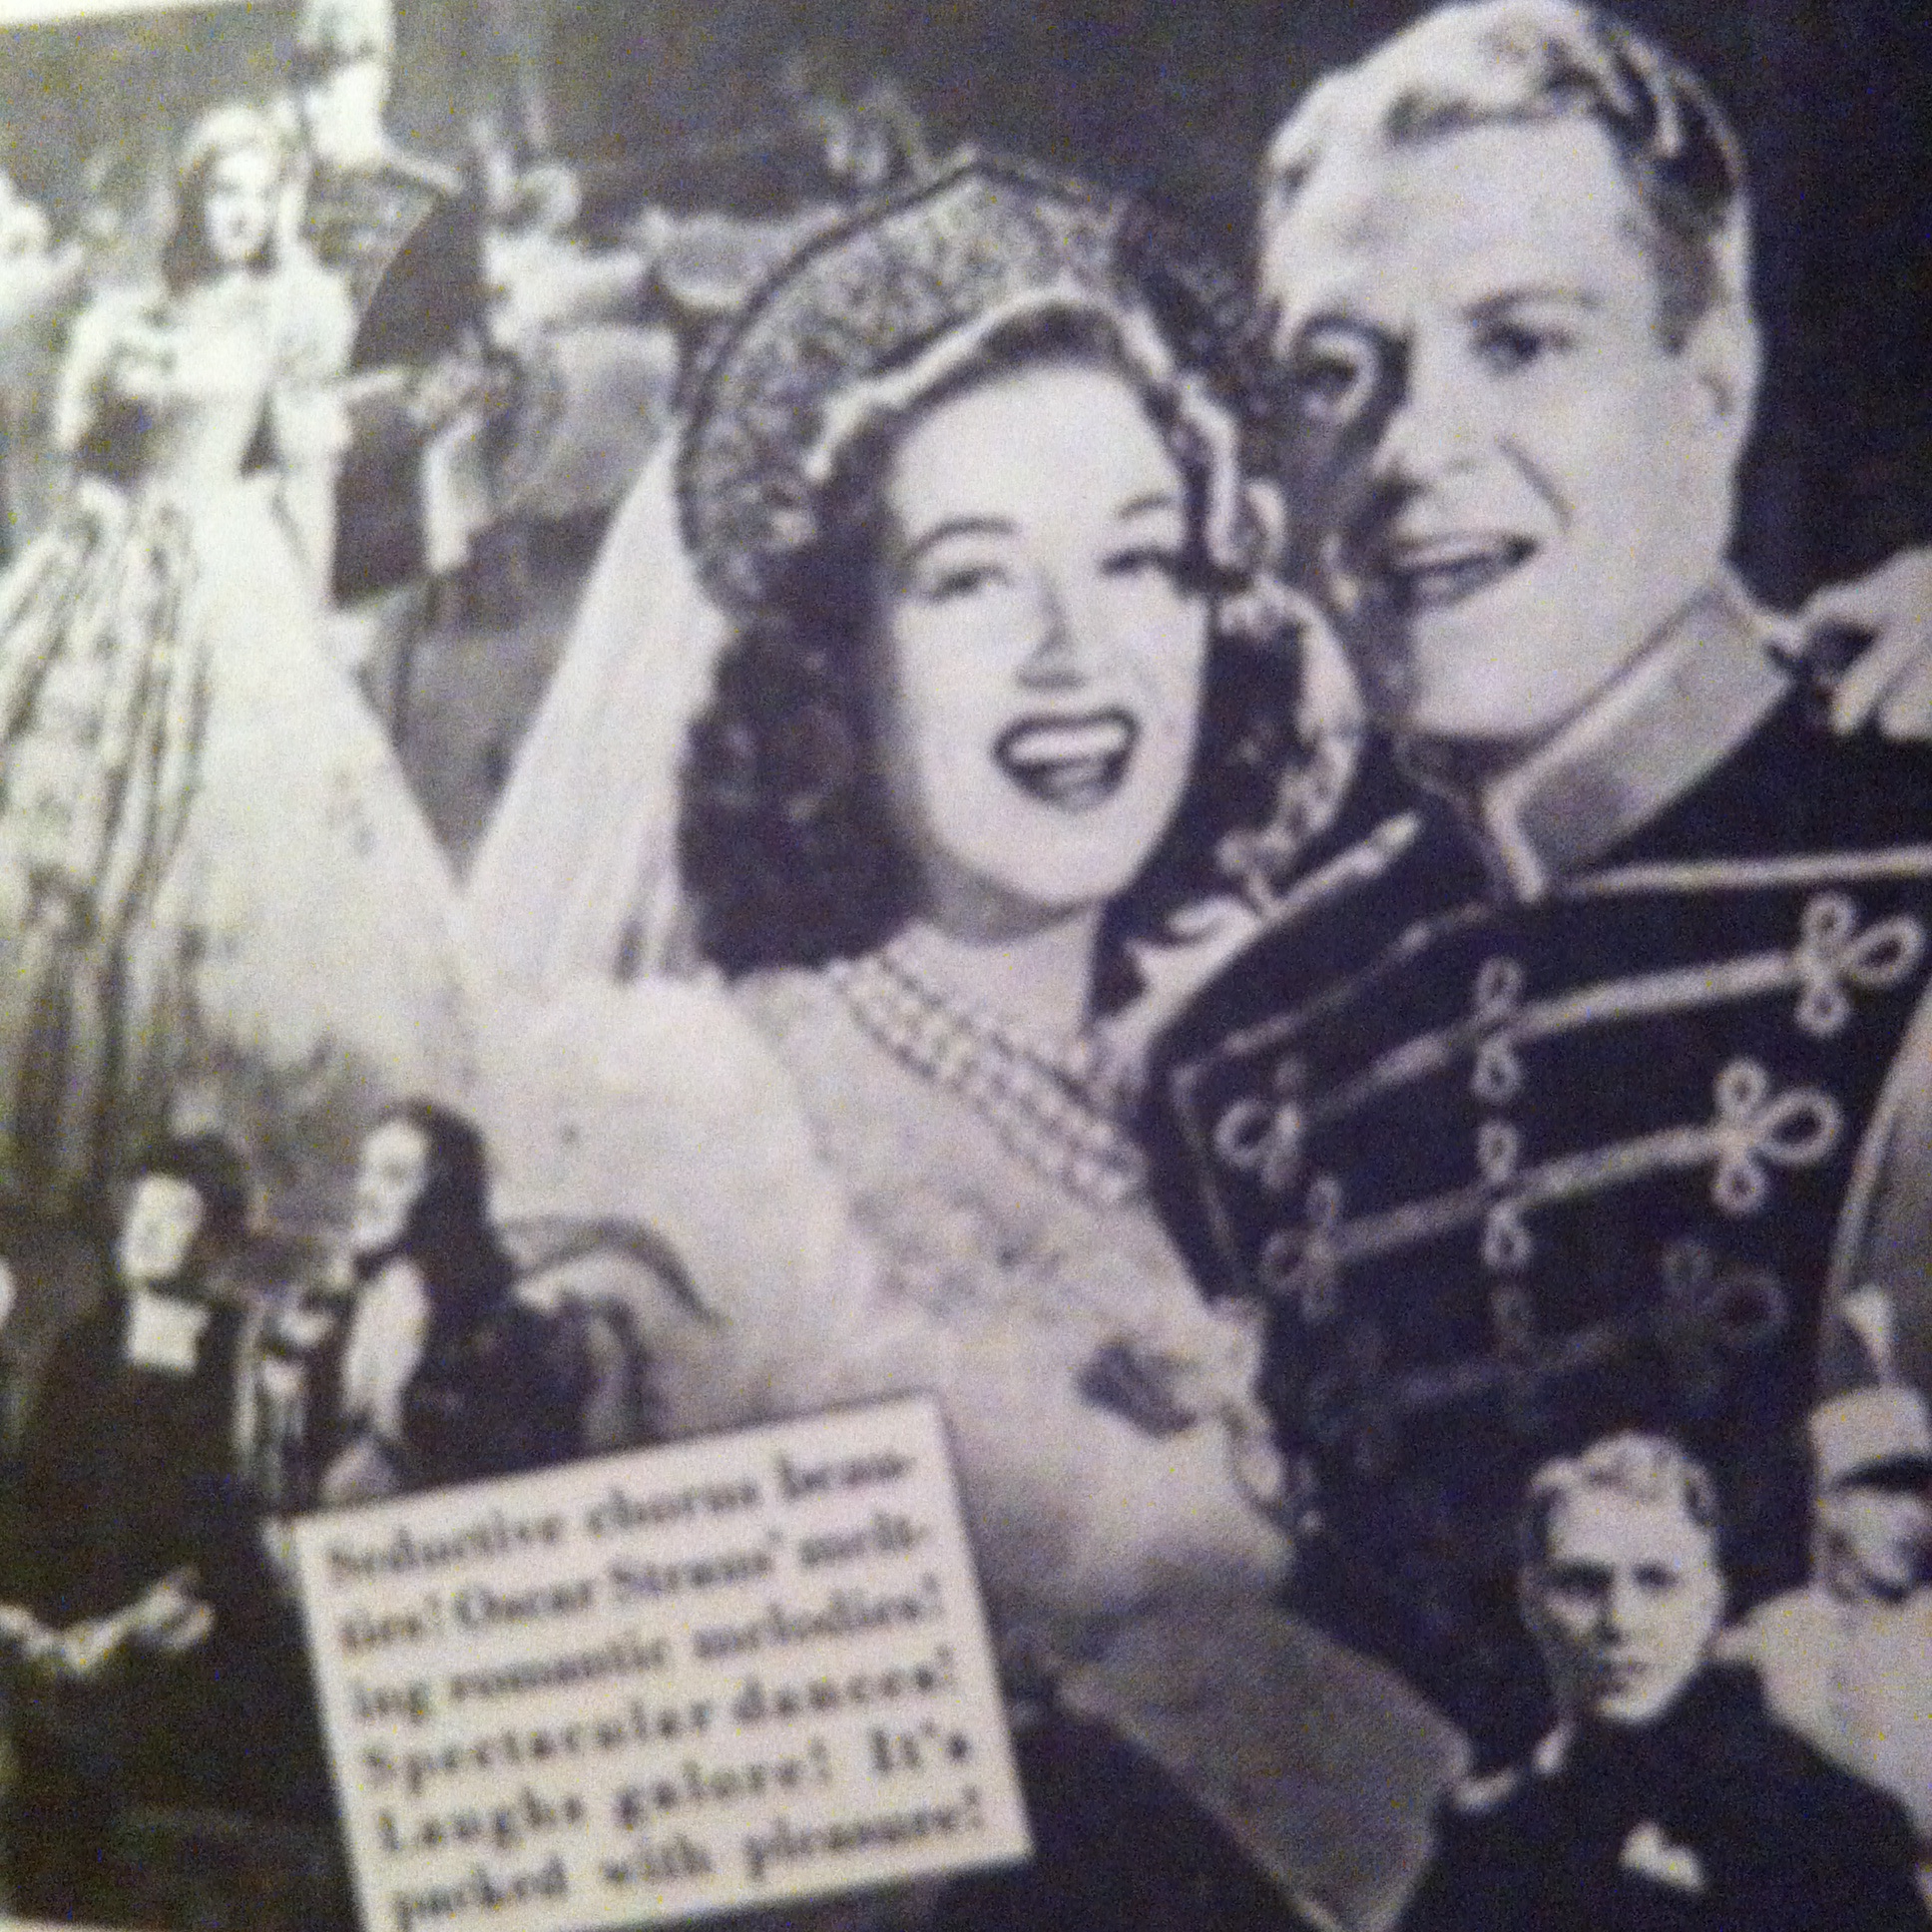 The Chocolate Soldier (1941) Screenshot 5